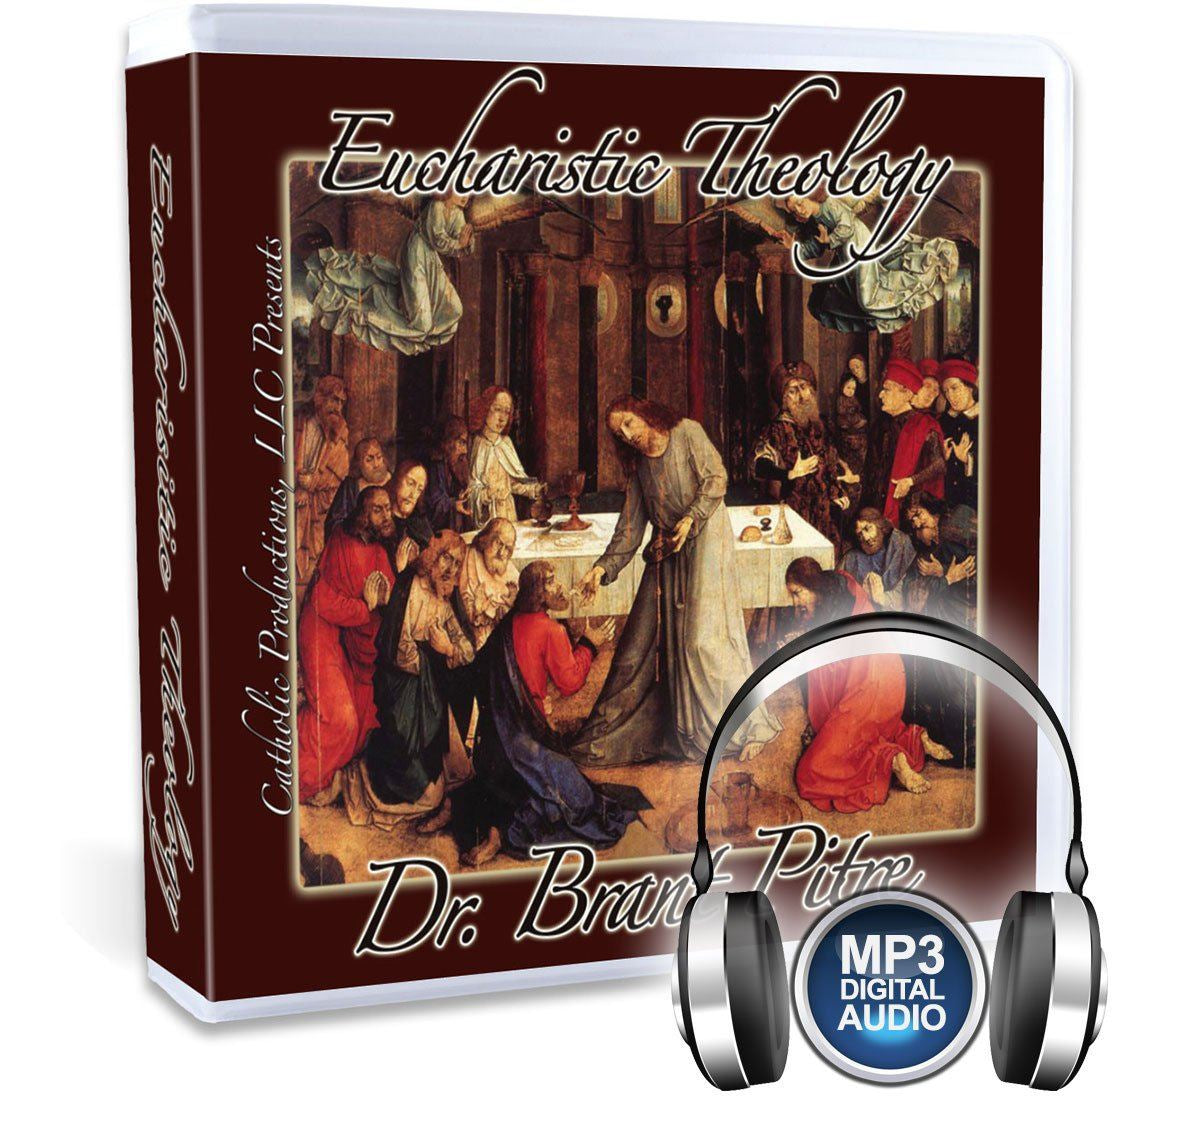 A thorough Biblical and historical study of the Eucharist with Dr. Brant Pitre CD